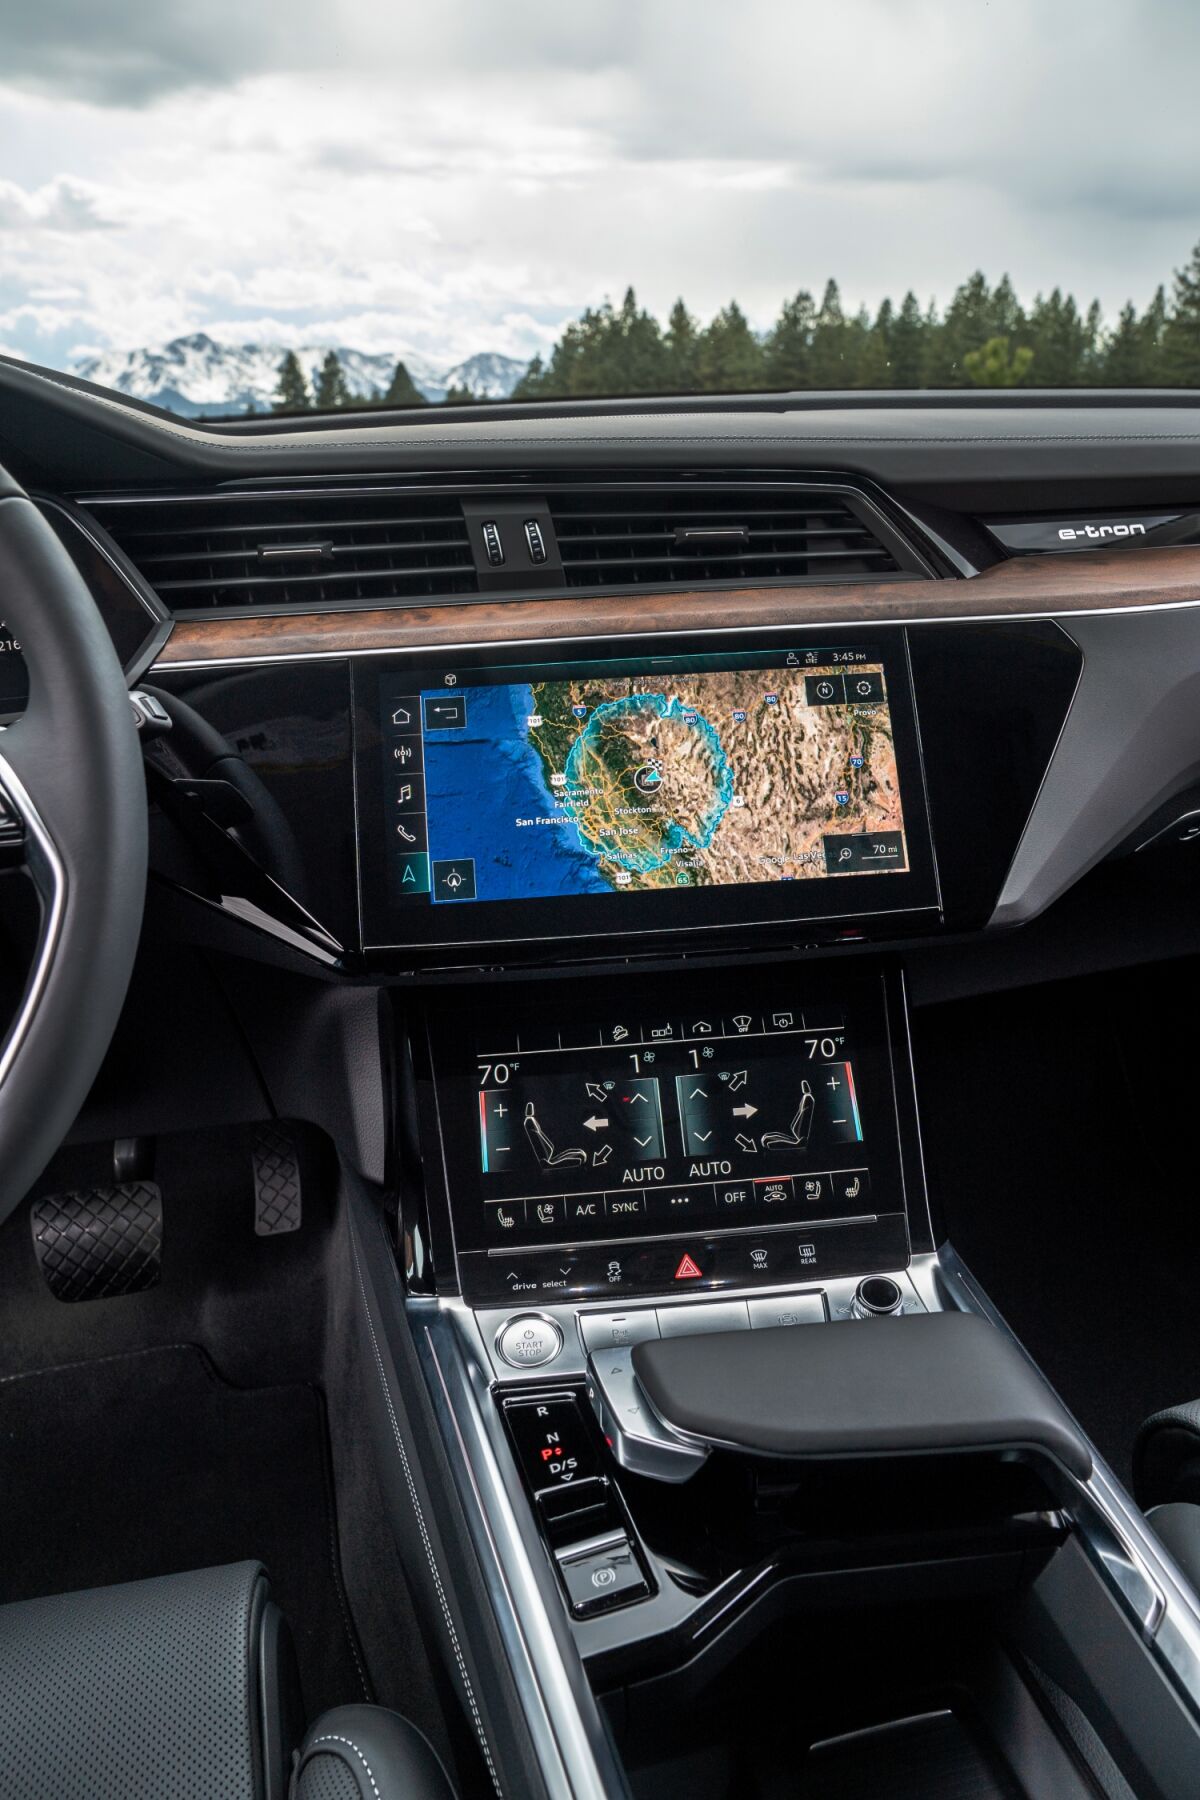 The large, 10.1-inch horizontal infotainment screen in the center instrument stack is clearly visible in all light conditions and integrates the top-view camera system.